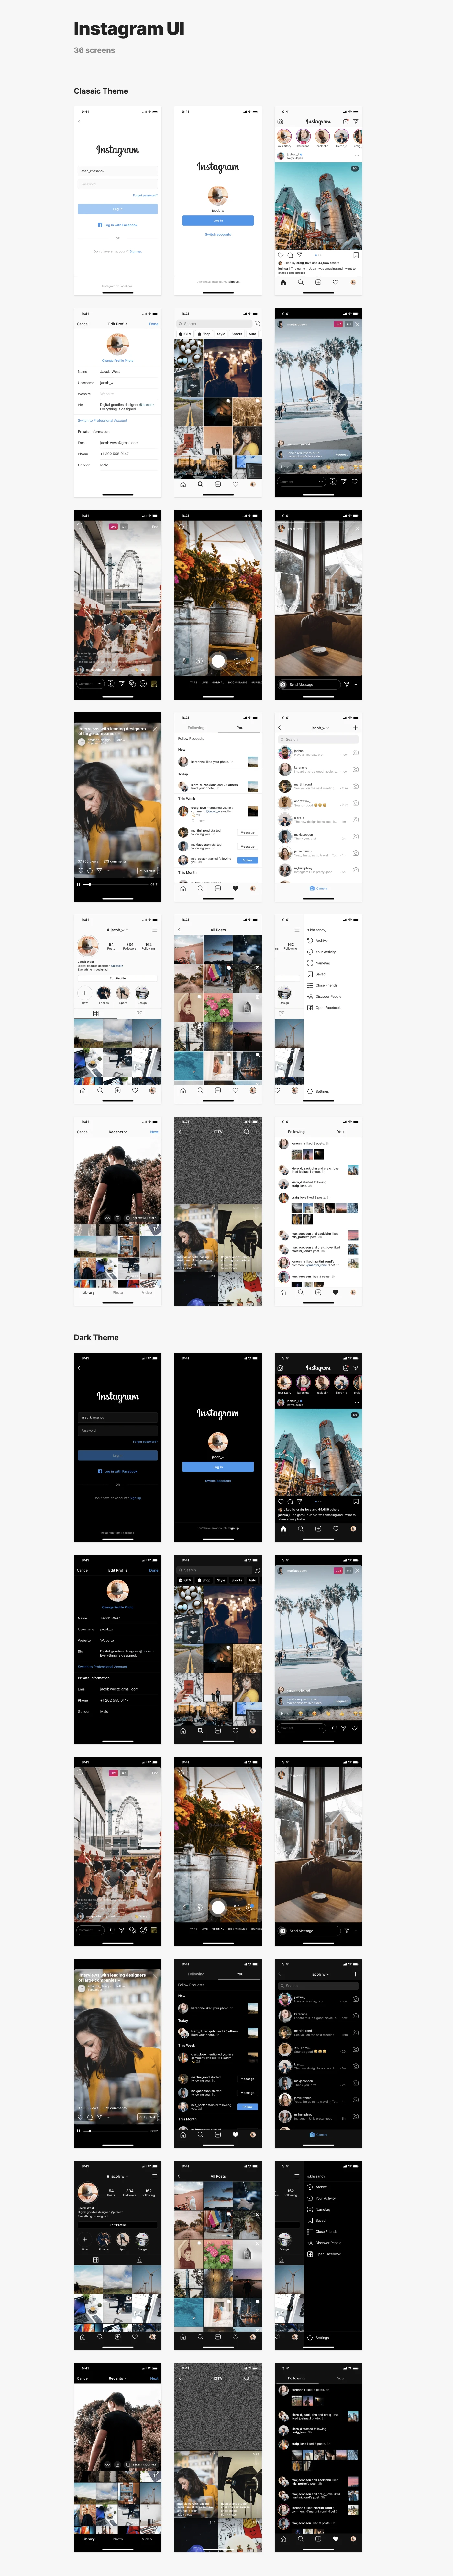 Mobile Apps Library for Sketch & Figma - 120+ reconstructed screens of popular mobile apps: Instagram, Telegram, Messenger, WhatsApp. Compatible with Sketch App & Figma.